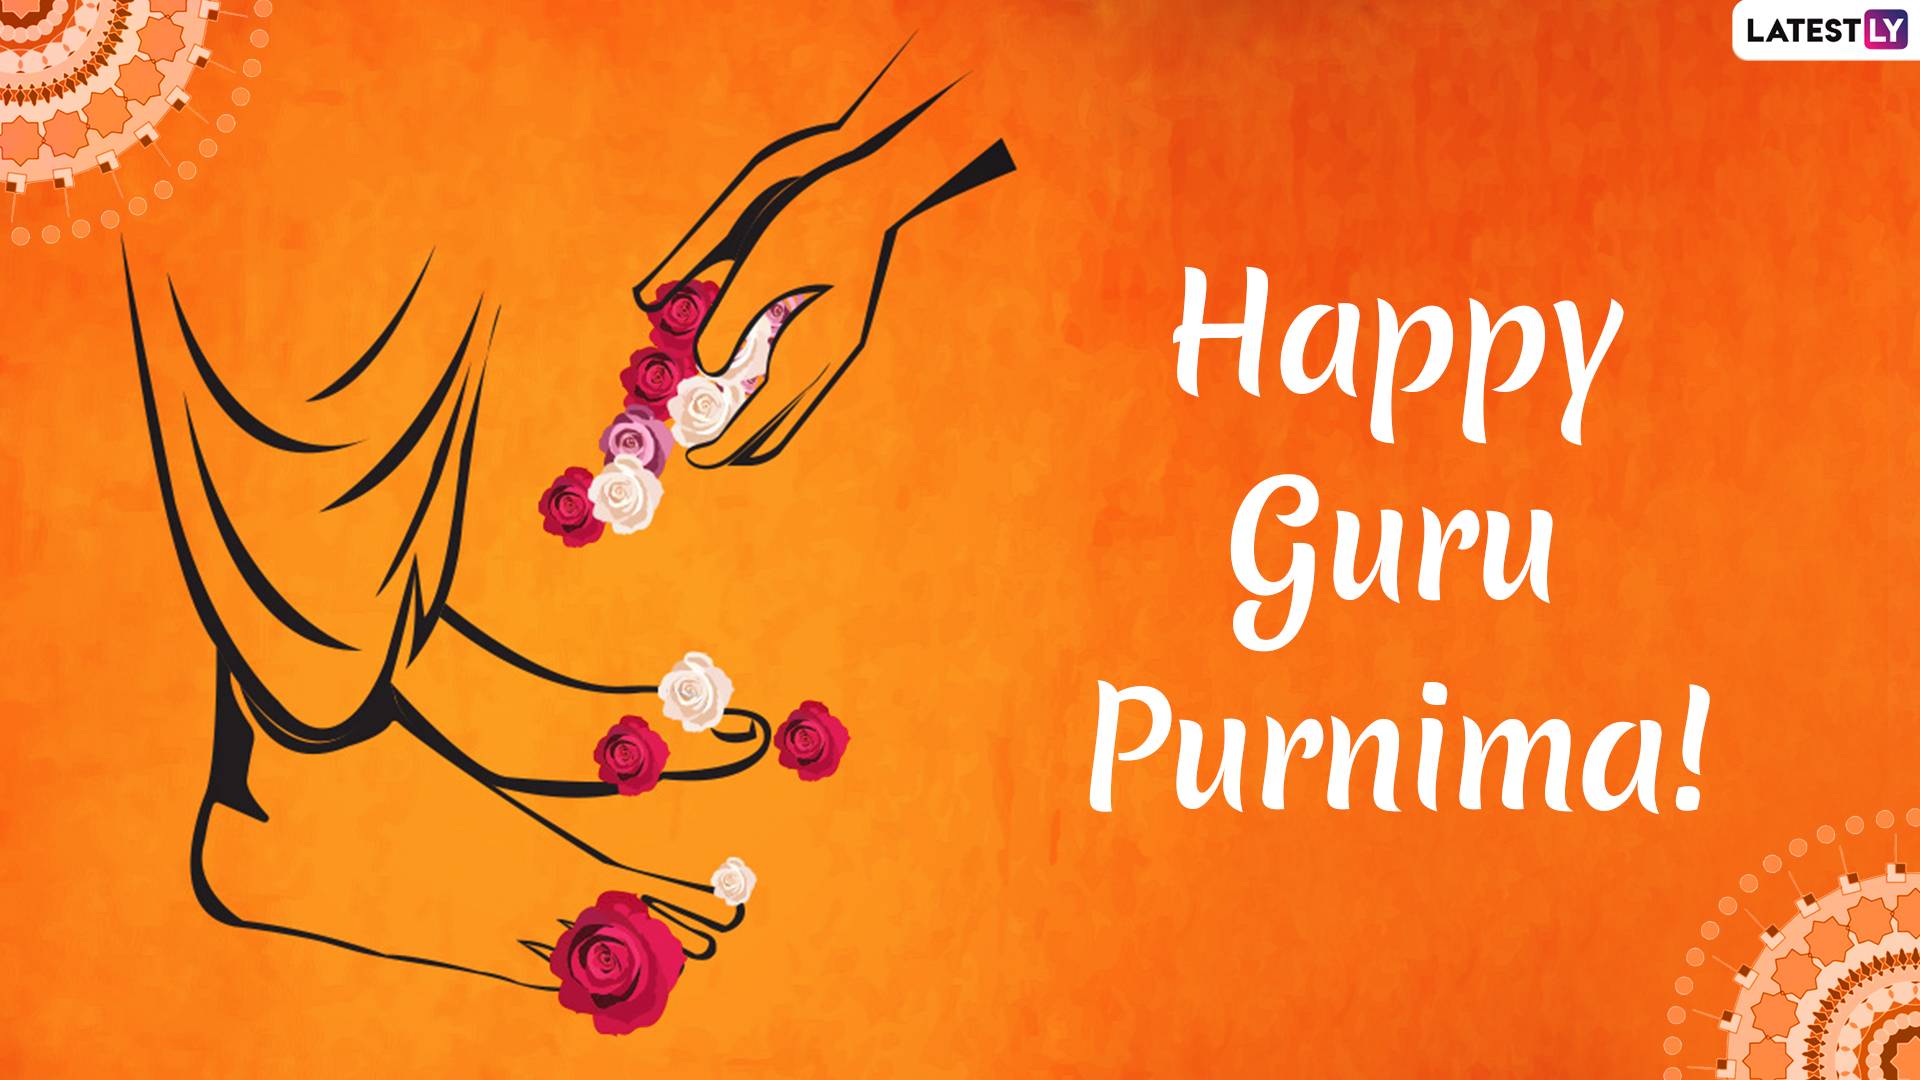 Happy Guru Purnima 2020 HD Images, Greetings & Wallpapers: Vyasa Purnima  Quotes, Photos, and Messages You Can Send Your Teachers as a Thank You |  🙏🏻 LatestLY